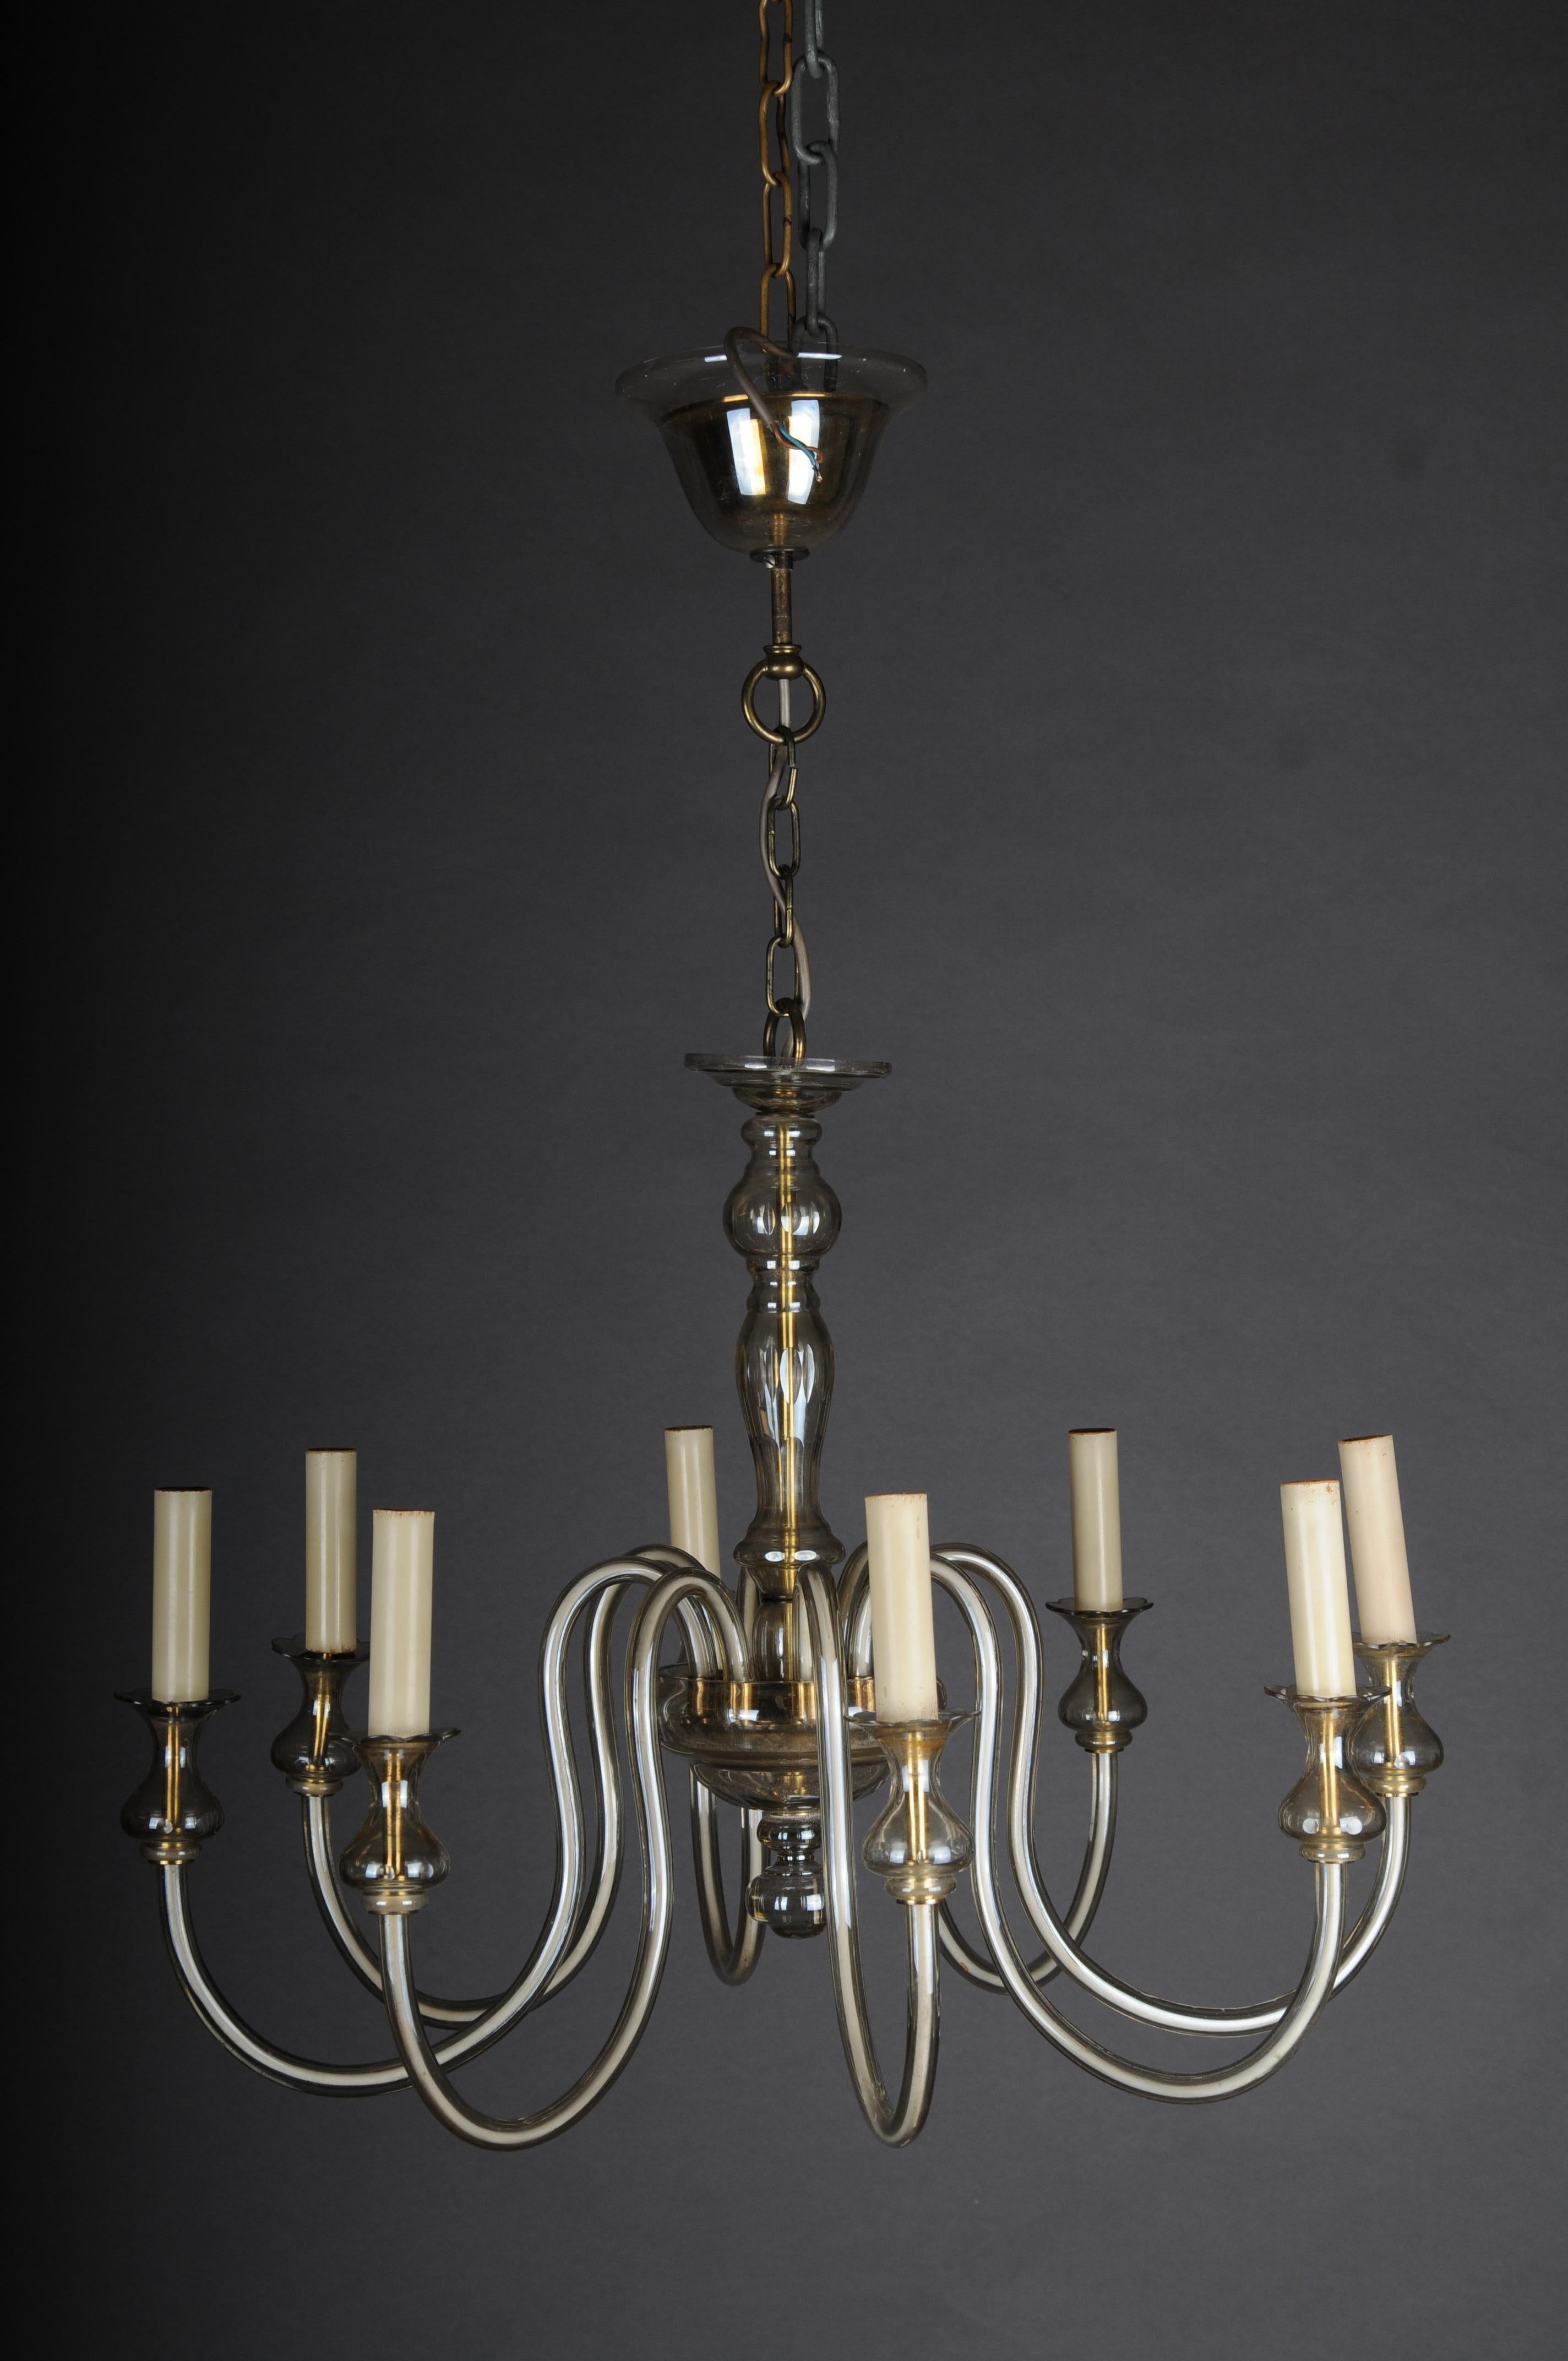 20th Century Glazed Italian chandelier


Impressive modern chandelier with 8 light arms. Entire body made of smoked glass. Very noble Italian design.